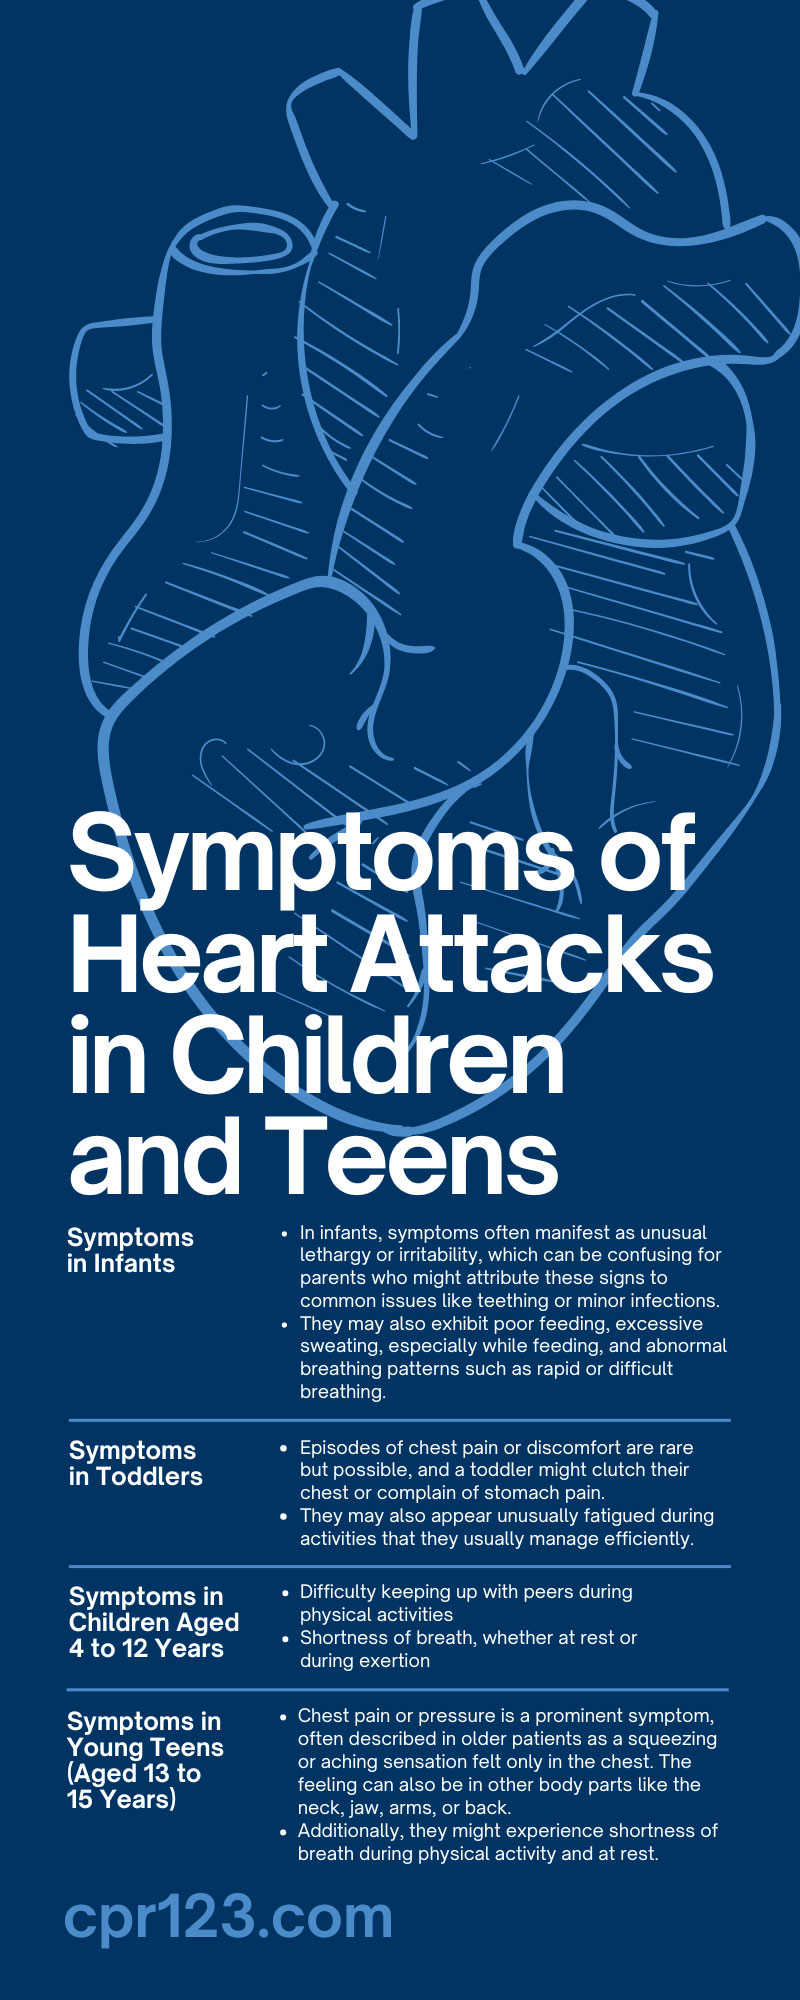 Symptoms of Heart Attacks in Children and Teens